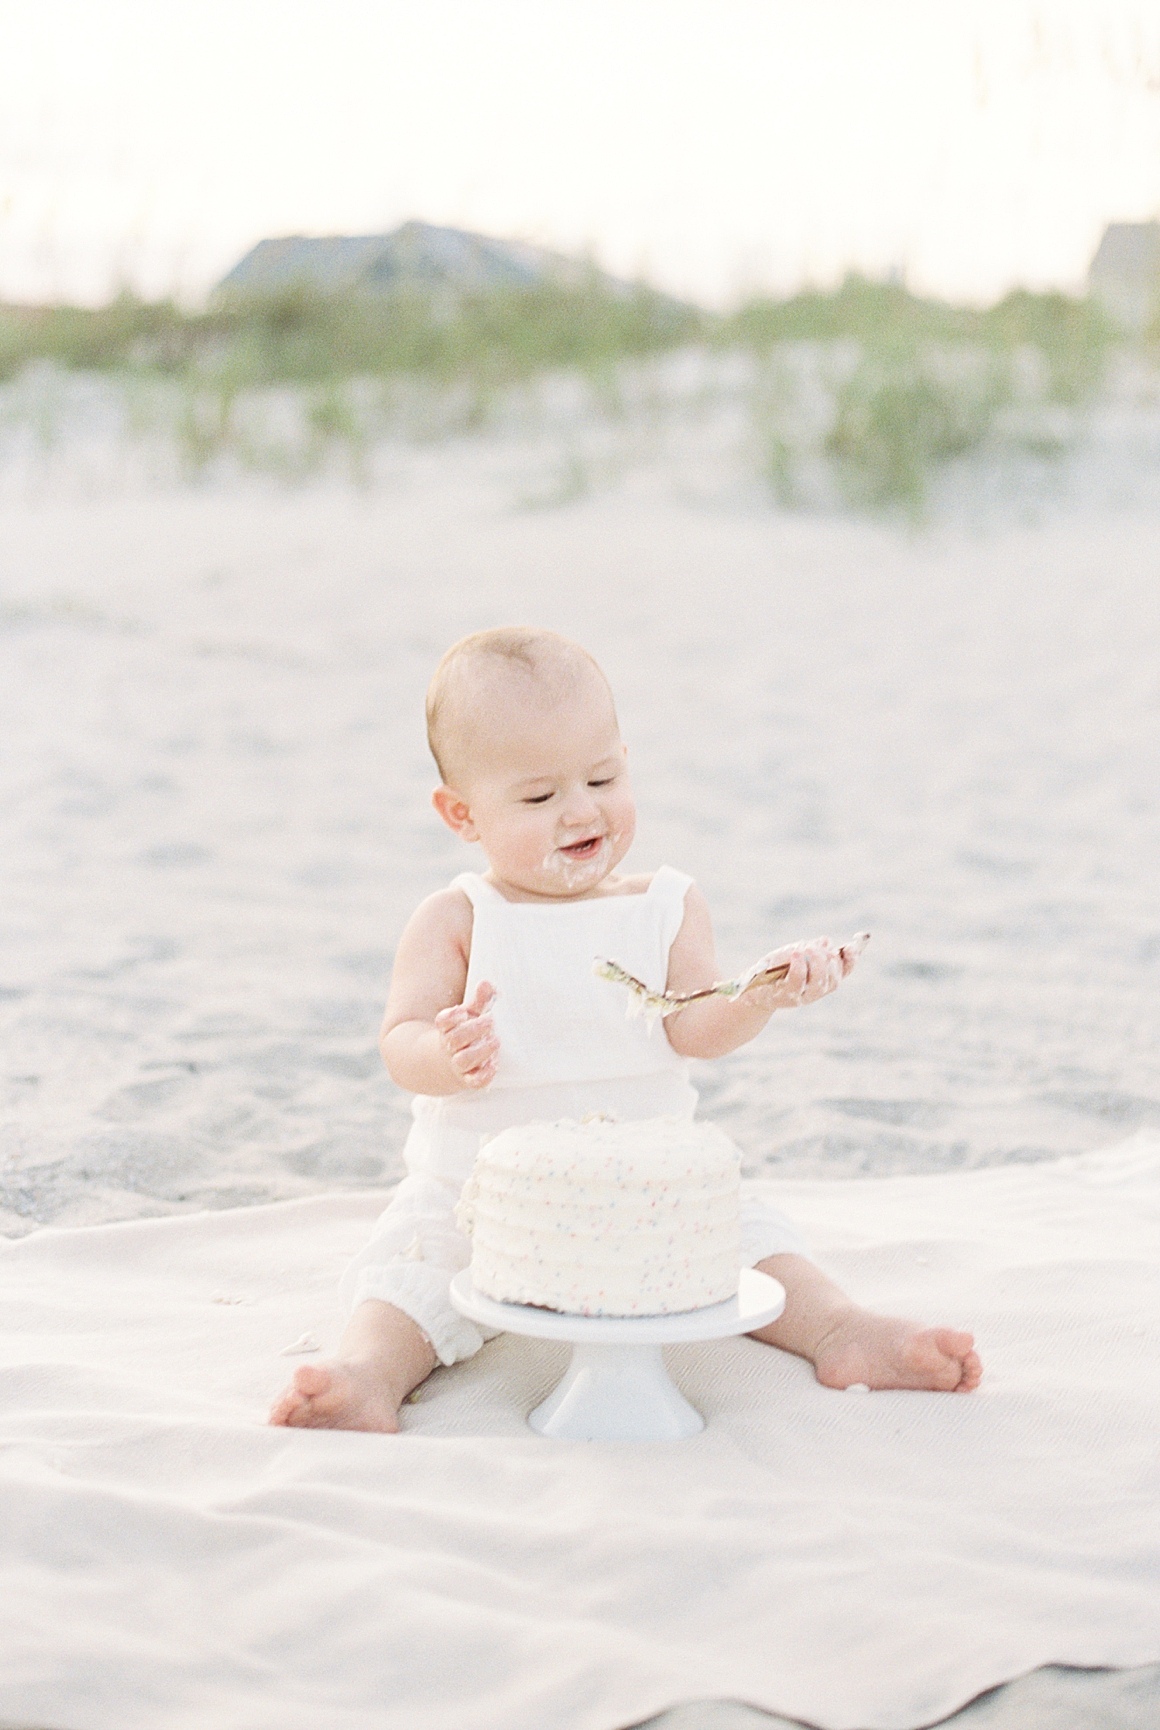 Cake smash on the beach to celebrate turning one! Photos by Isle of Palms Photographer, Caitlyn Motycka Photography.